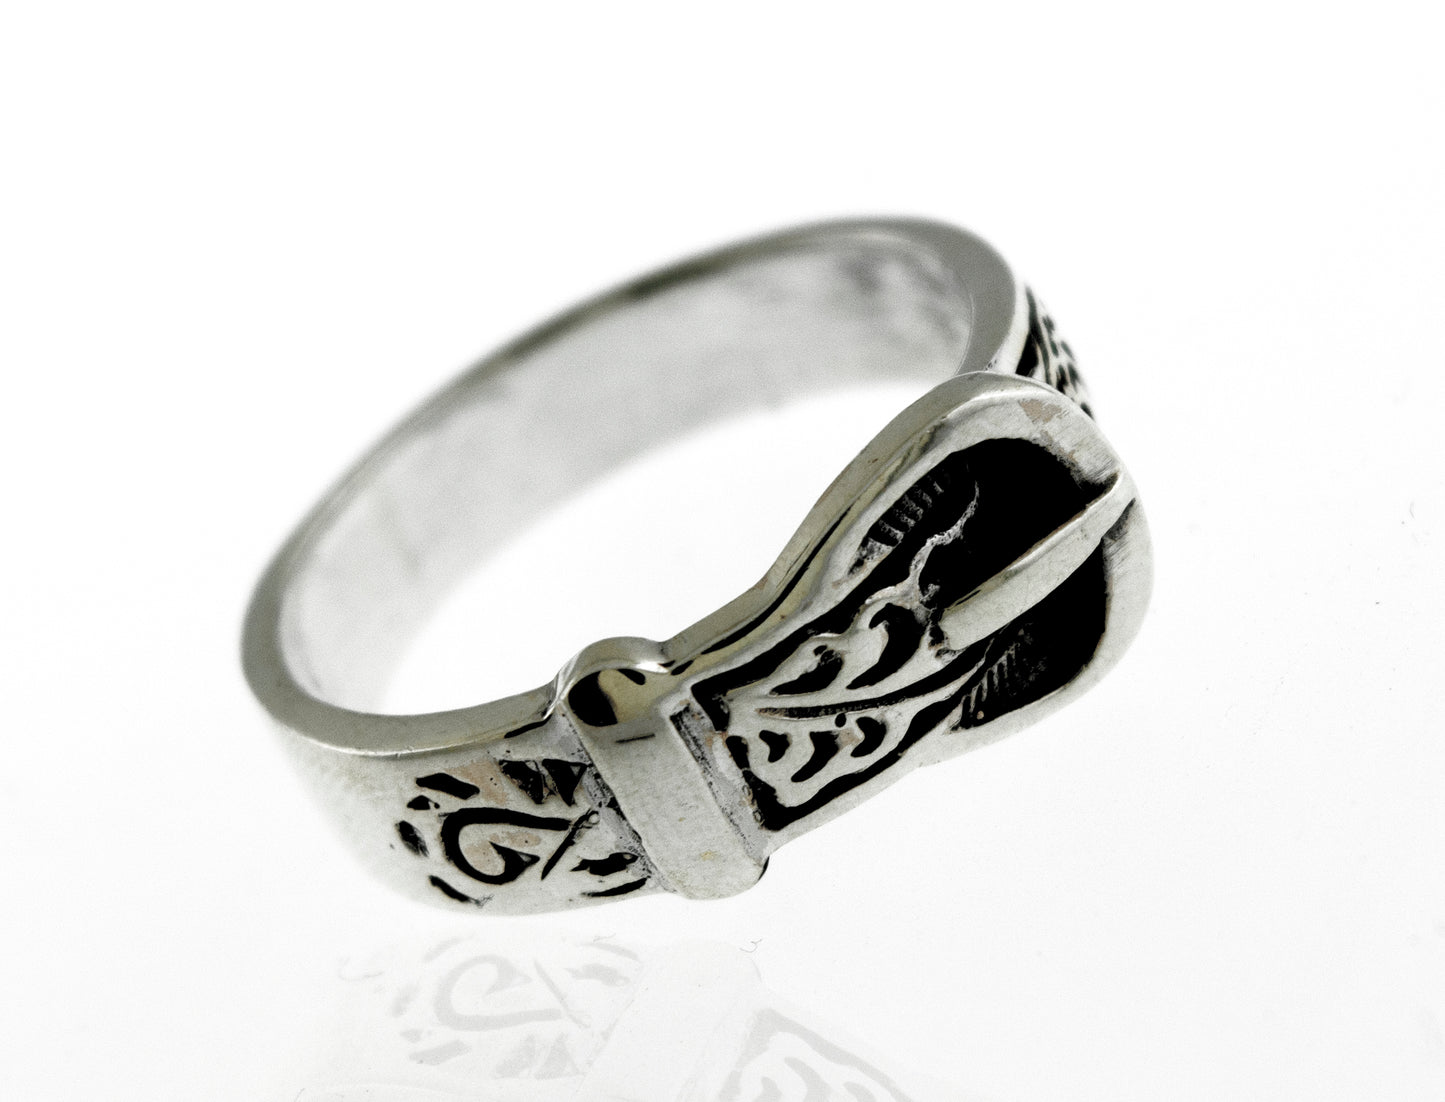 A Silver Belt Ring with Design with a freestyle etching design.